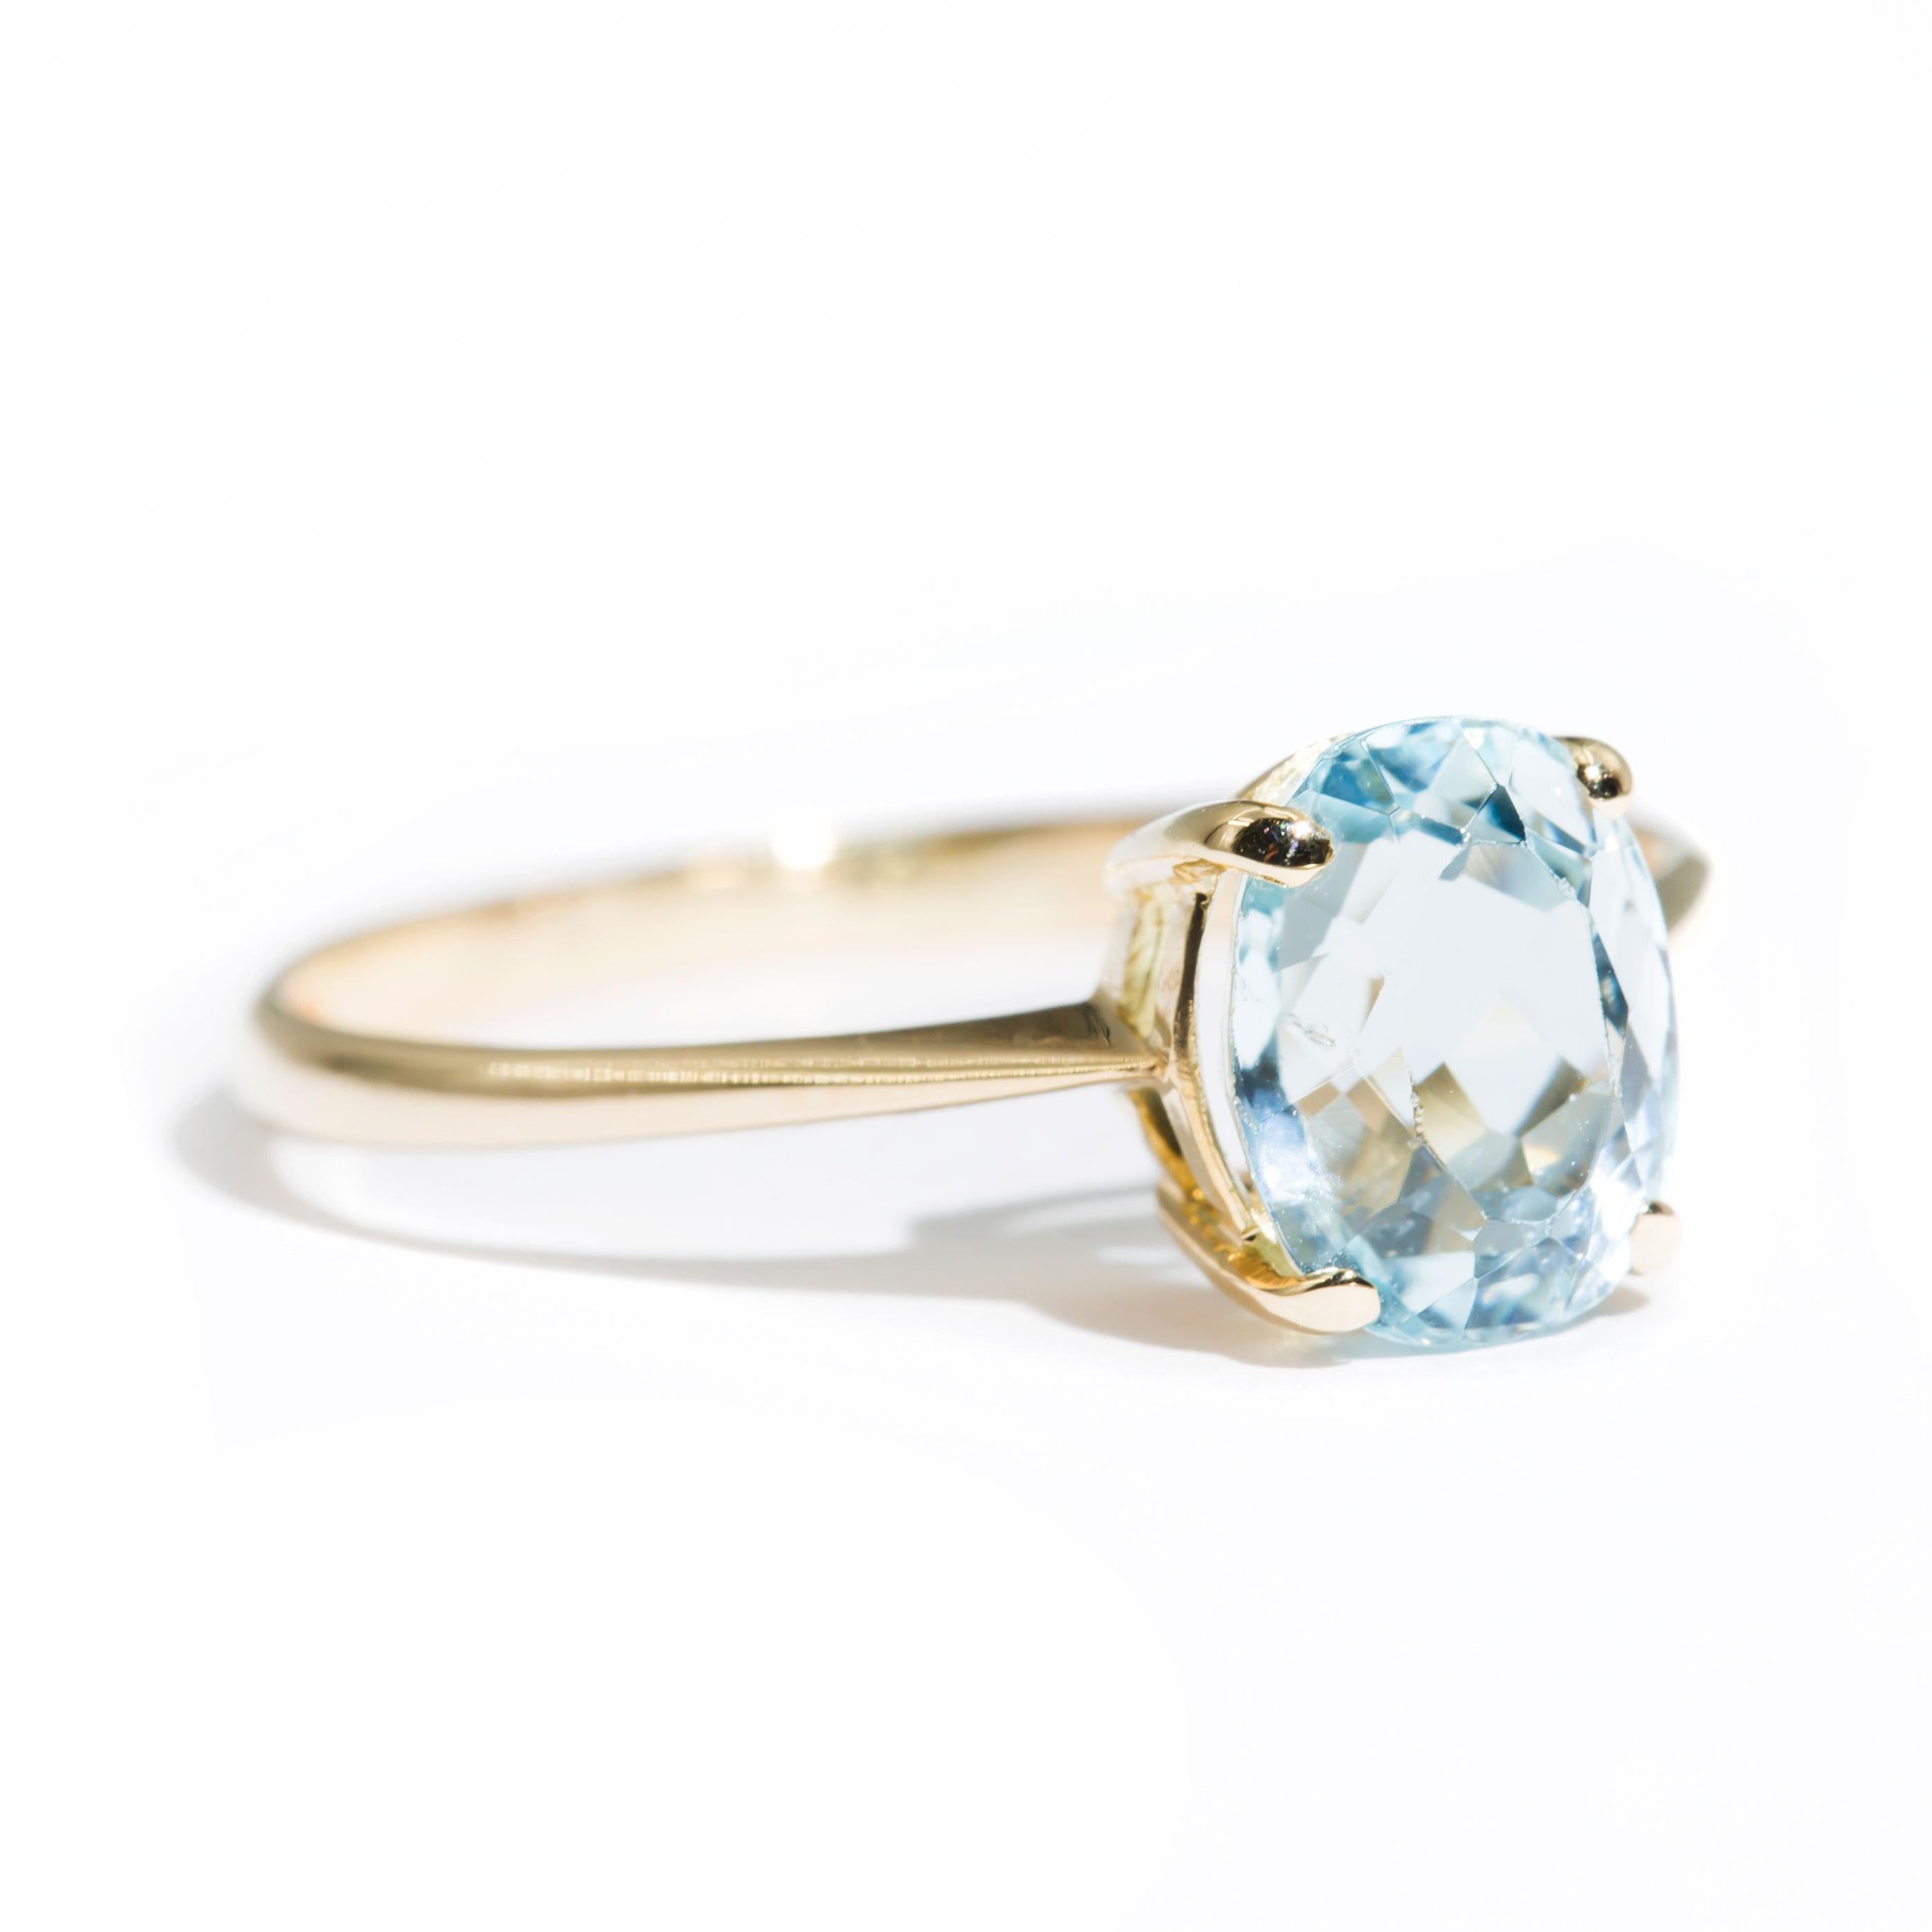 Oval Cut 1.84 Carat Oval Bright Light Blue Aquamarine Vintage Solitaire Ring